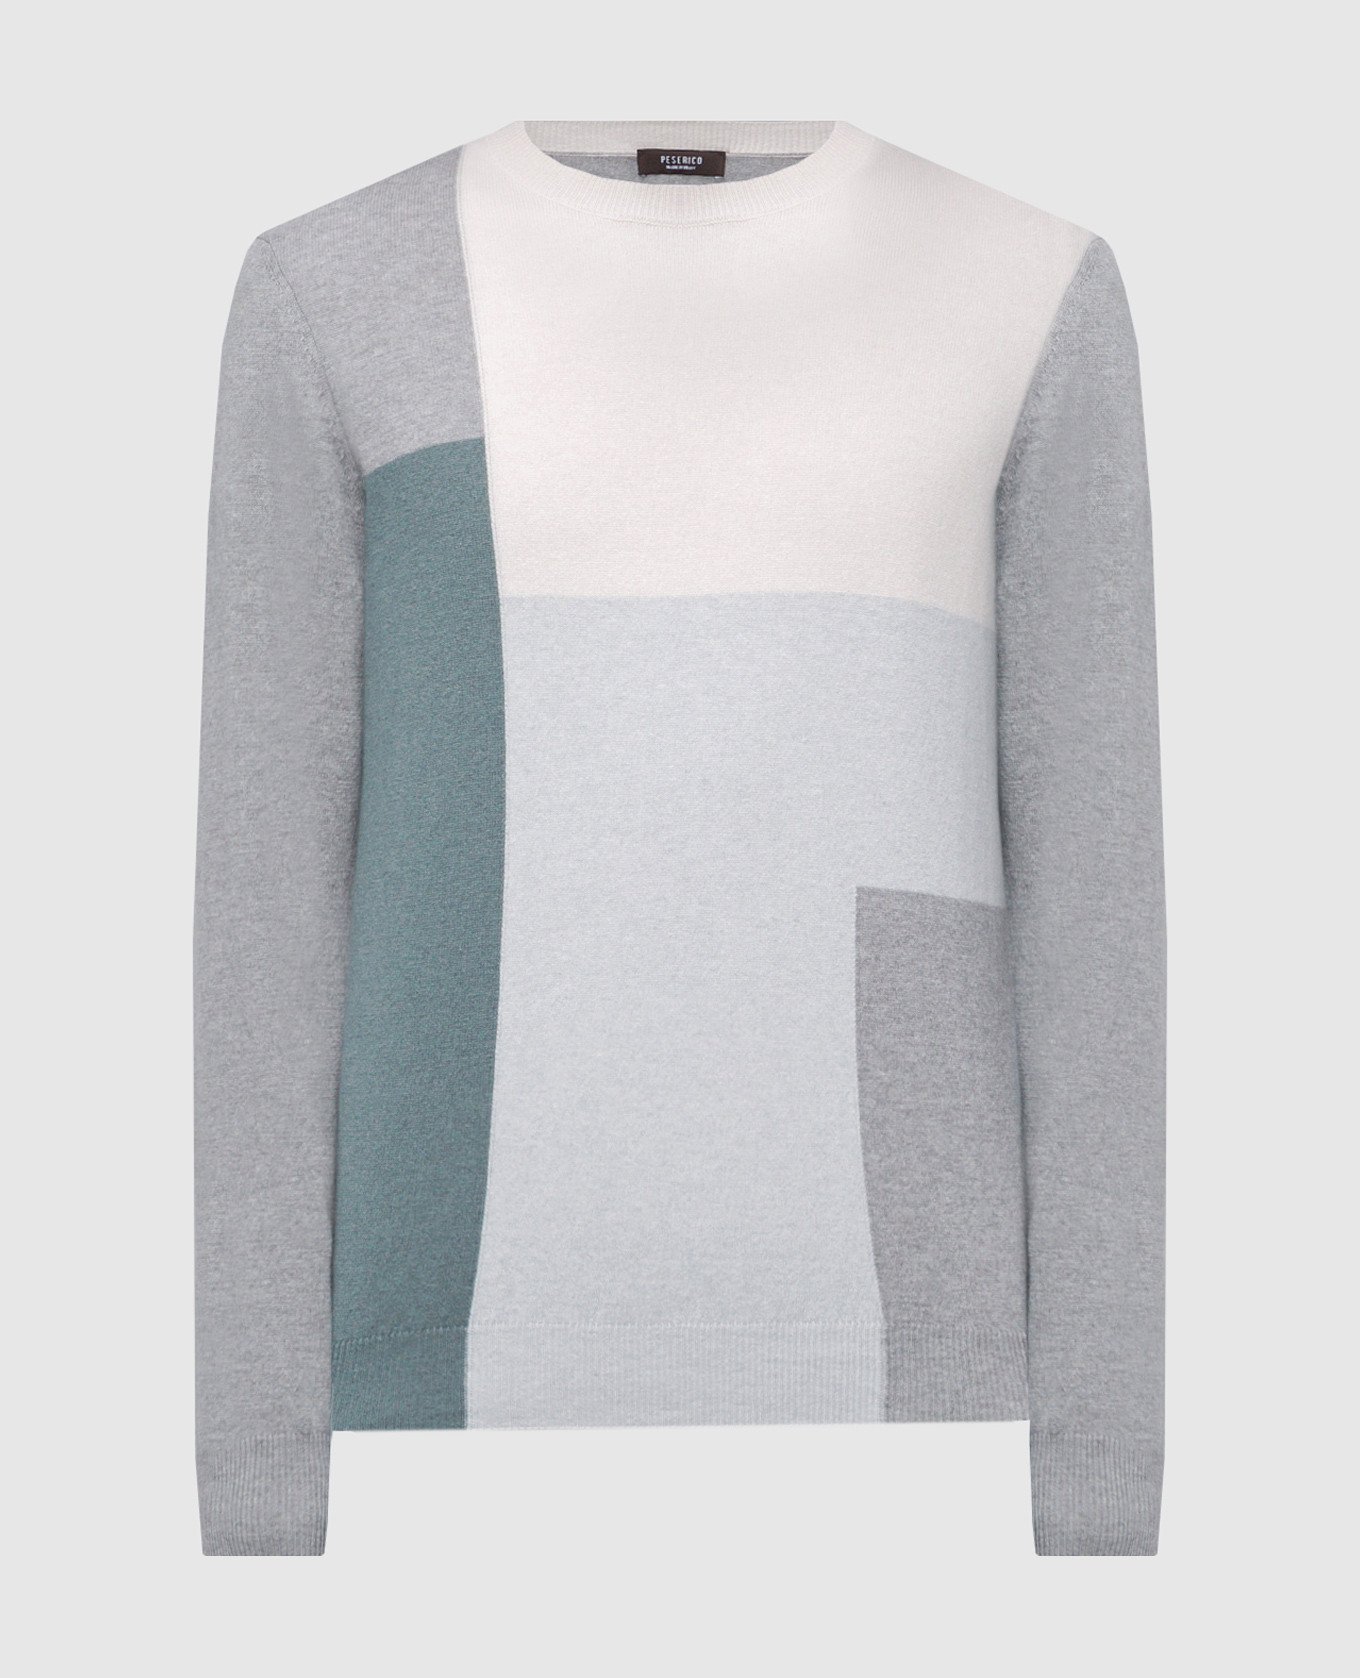 Jumper made of wool, silk and cashmere in a geometric pattern